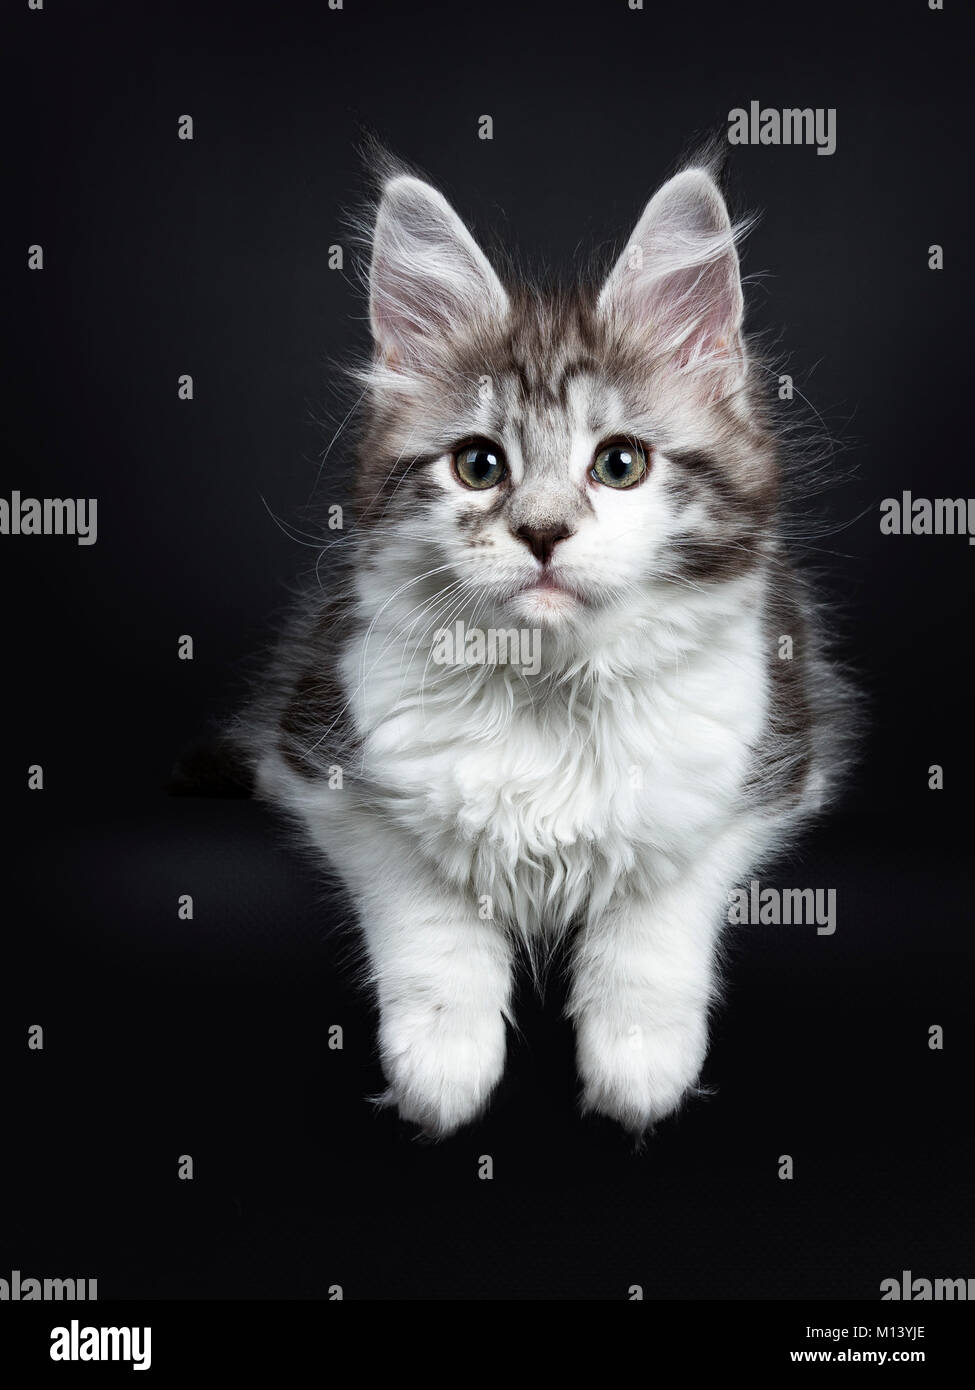 Black silver classic tabby white Maine Coon kitten / young cat laying on  black background with paws hanging over edge Stock Photo - Alamy